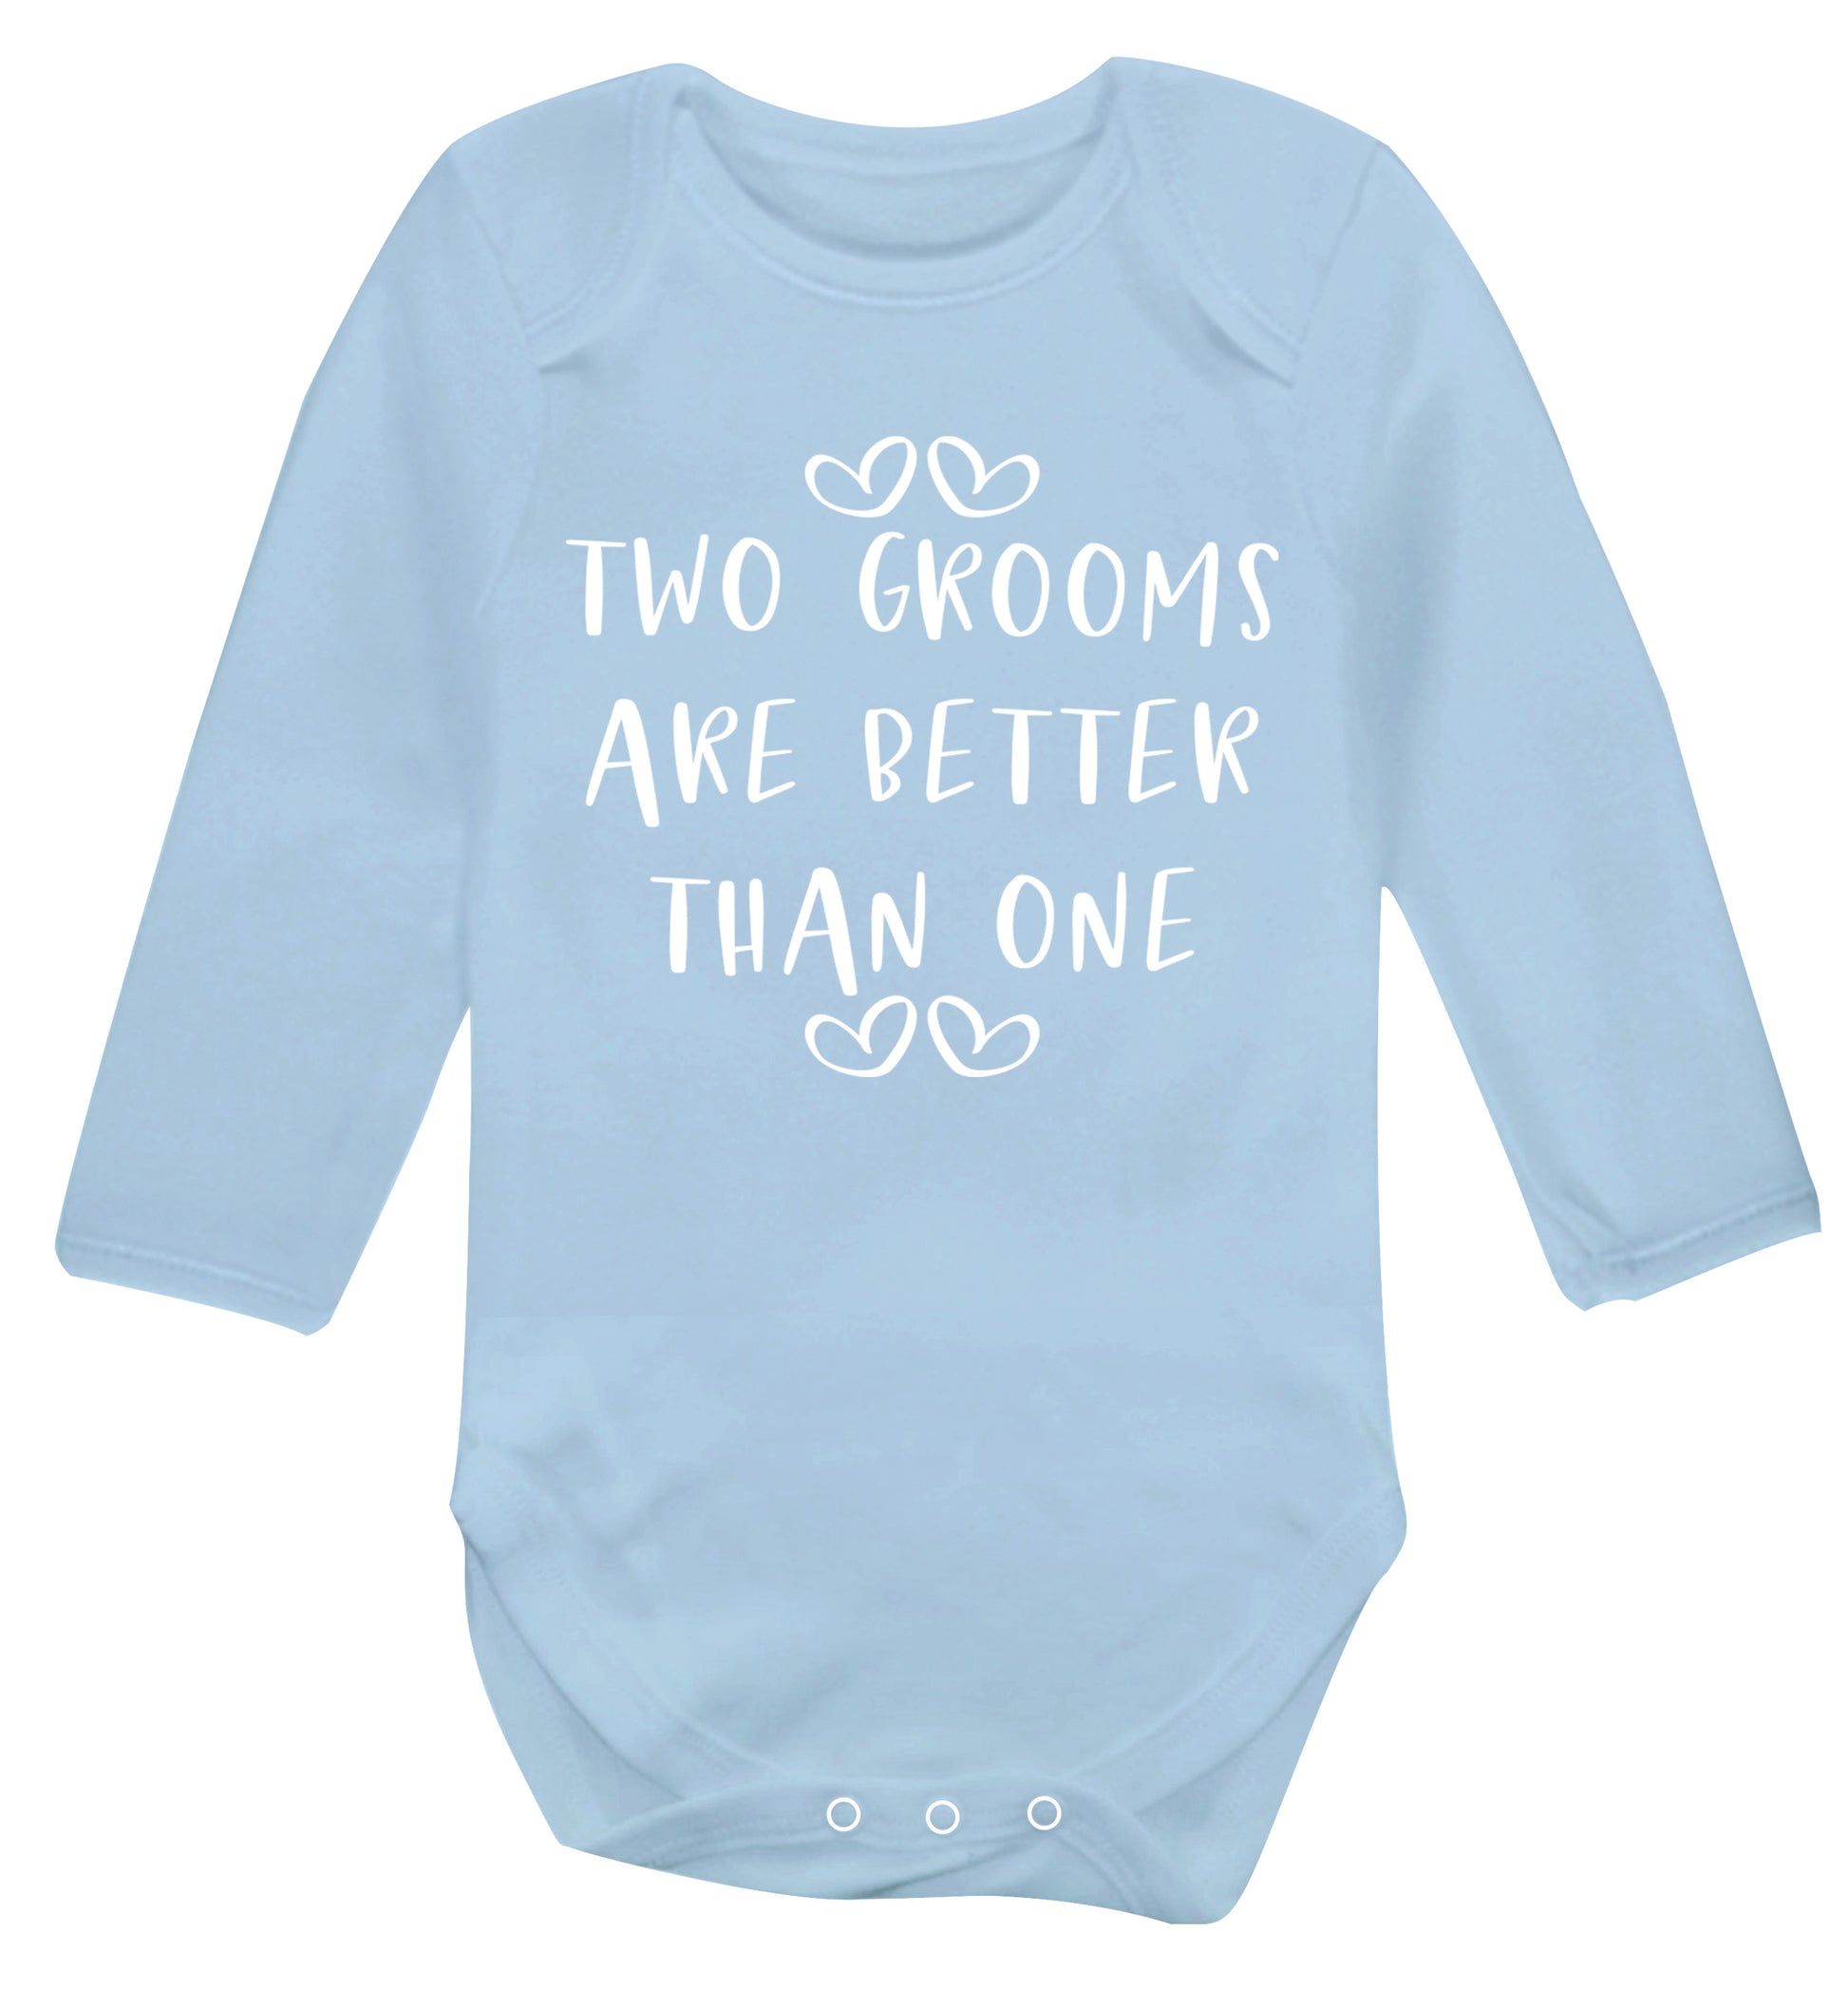 Two grooms are better than one baby vest long sleeved pale blue 6-12 months